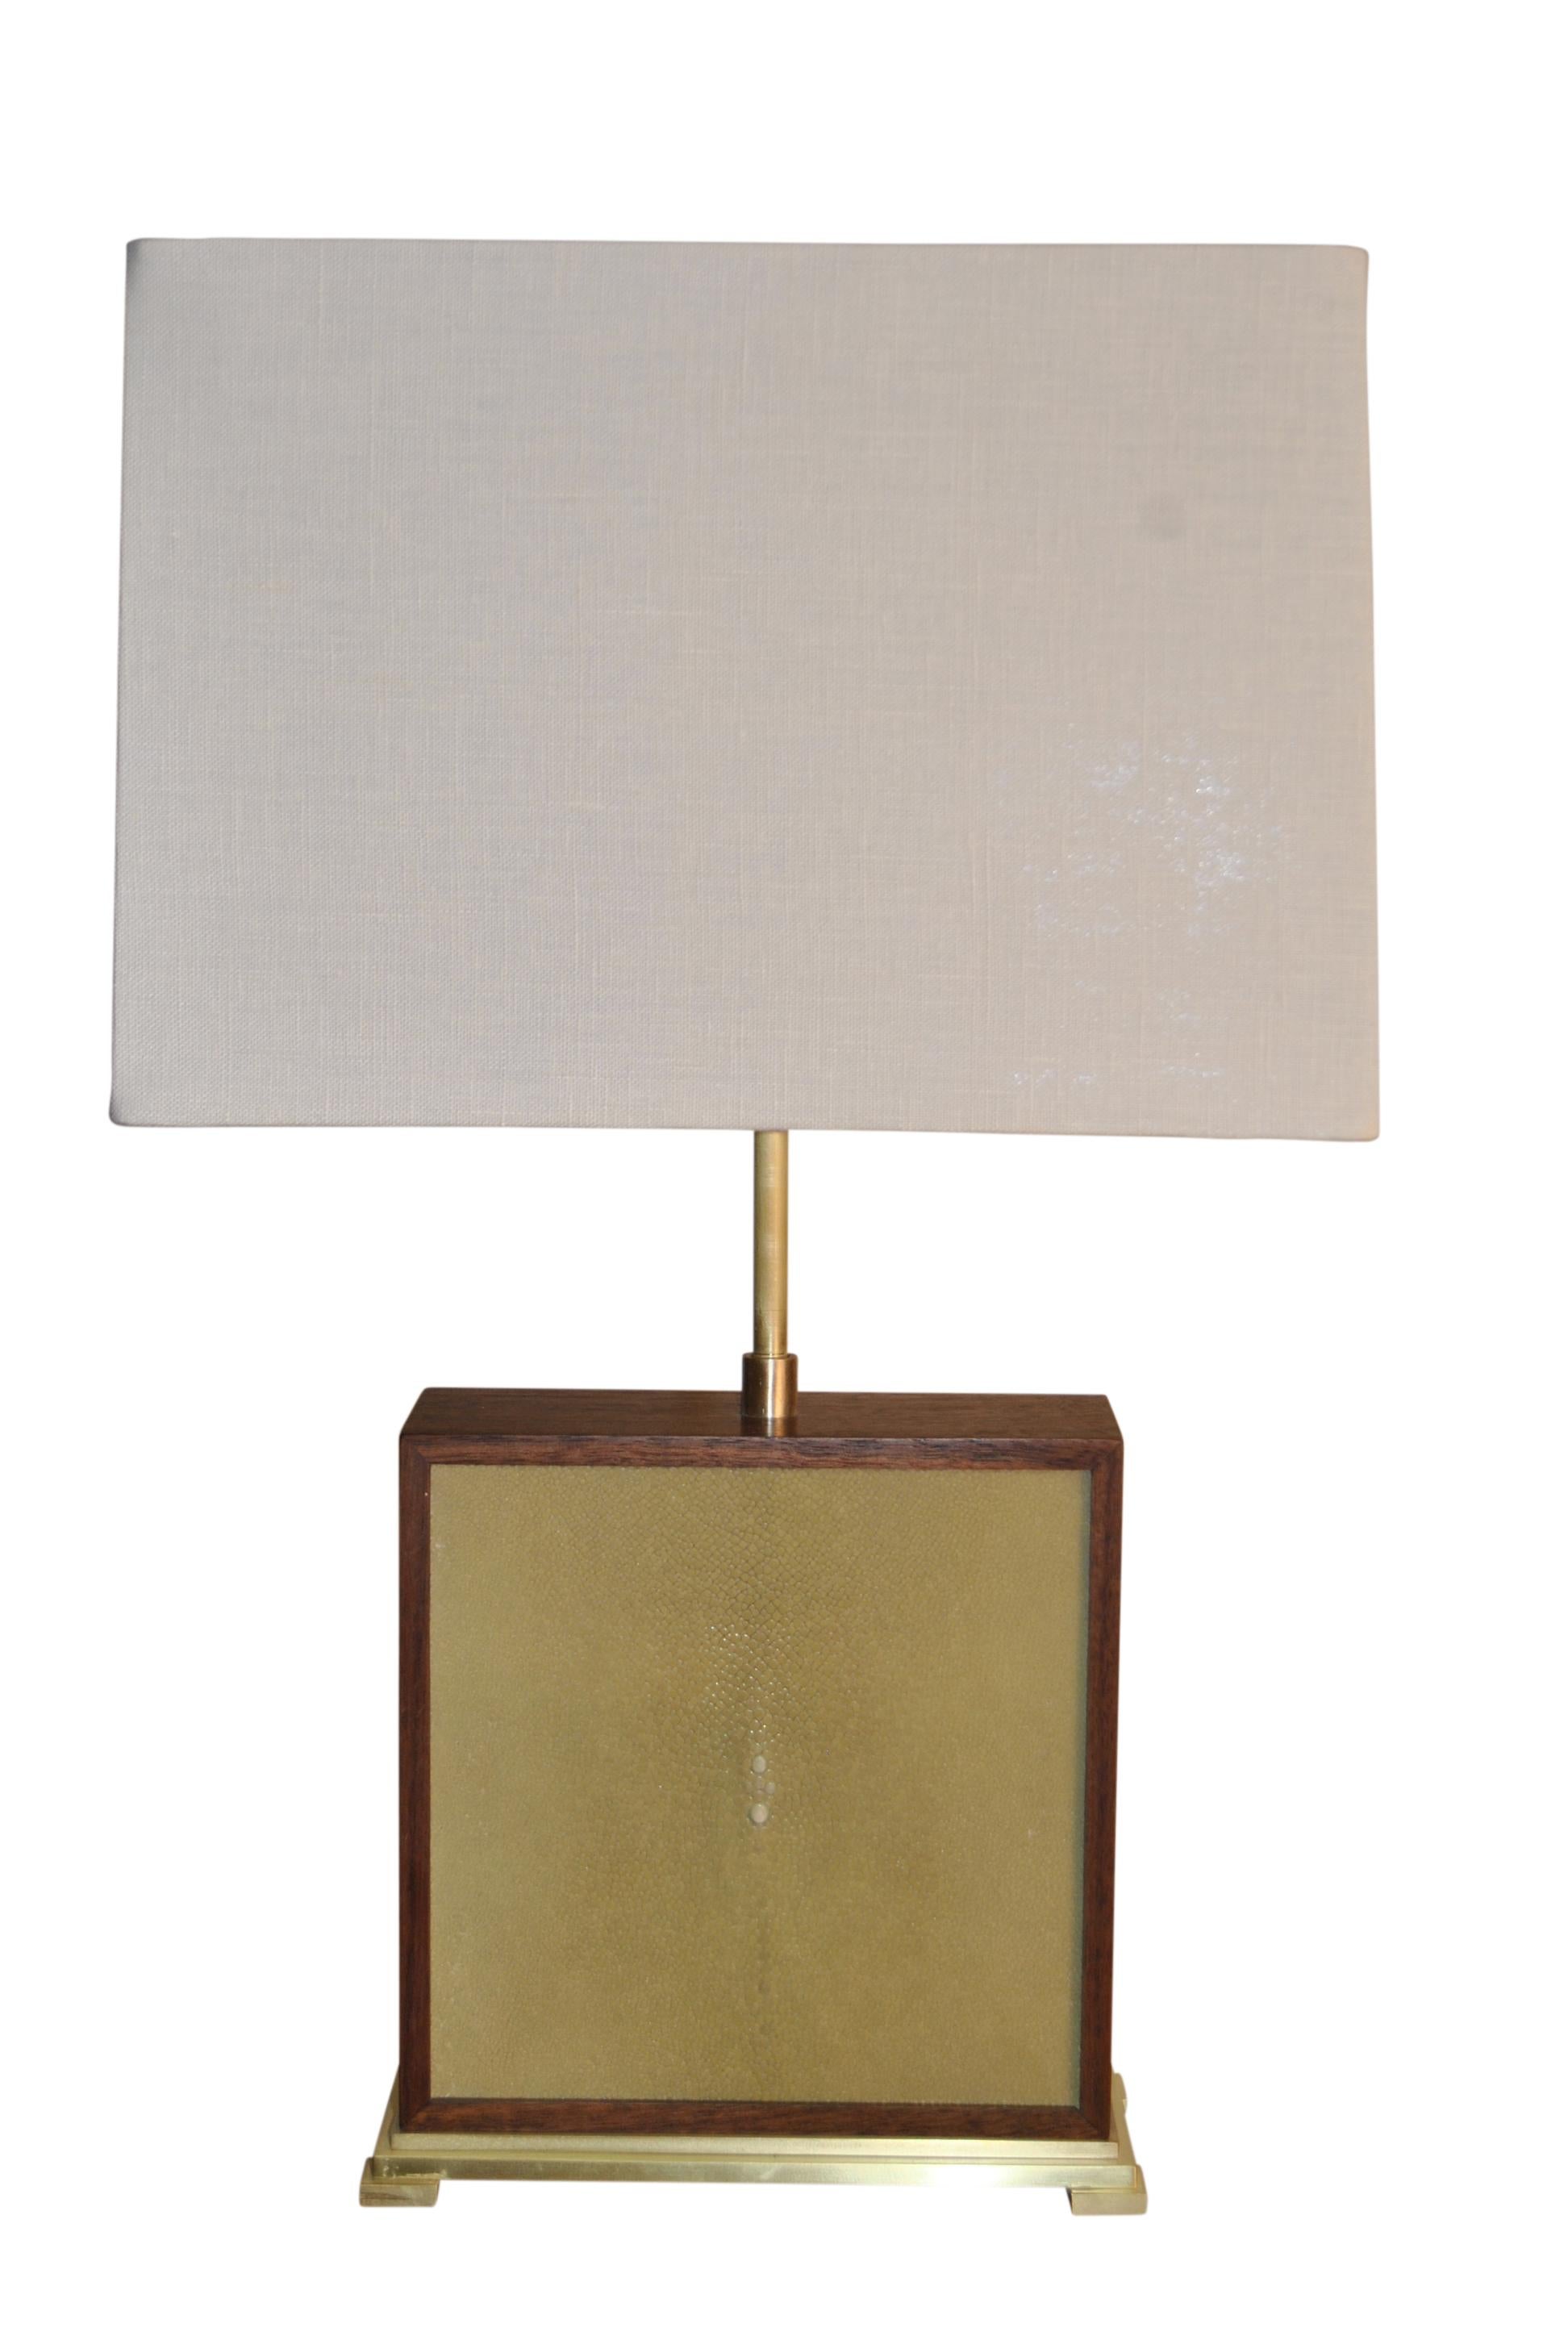 Handcrafted table lamp in walnut, stingray hide and brass polished and lacquered to satin finish. Various color options for stingray are shown in our pictures with colors ranging from neutrals to bright prime colors to deep jewel tones. Minimalistic